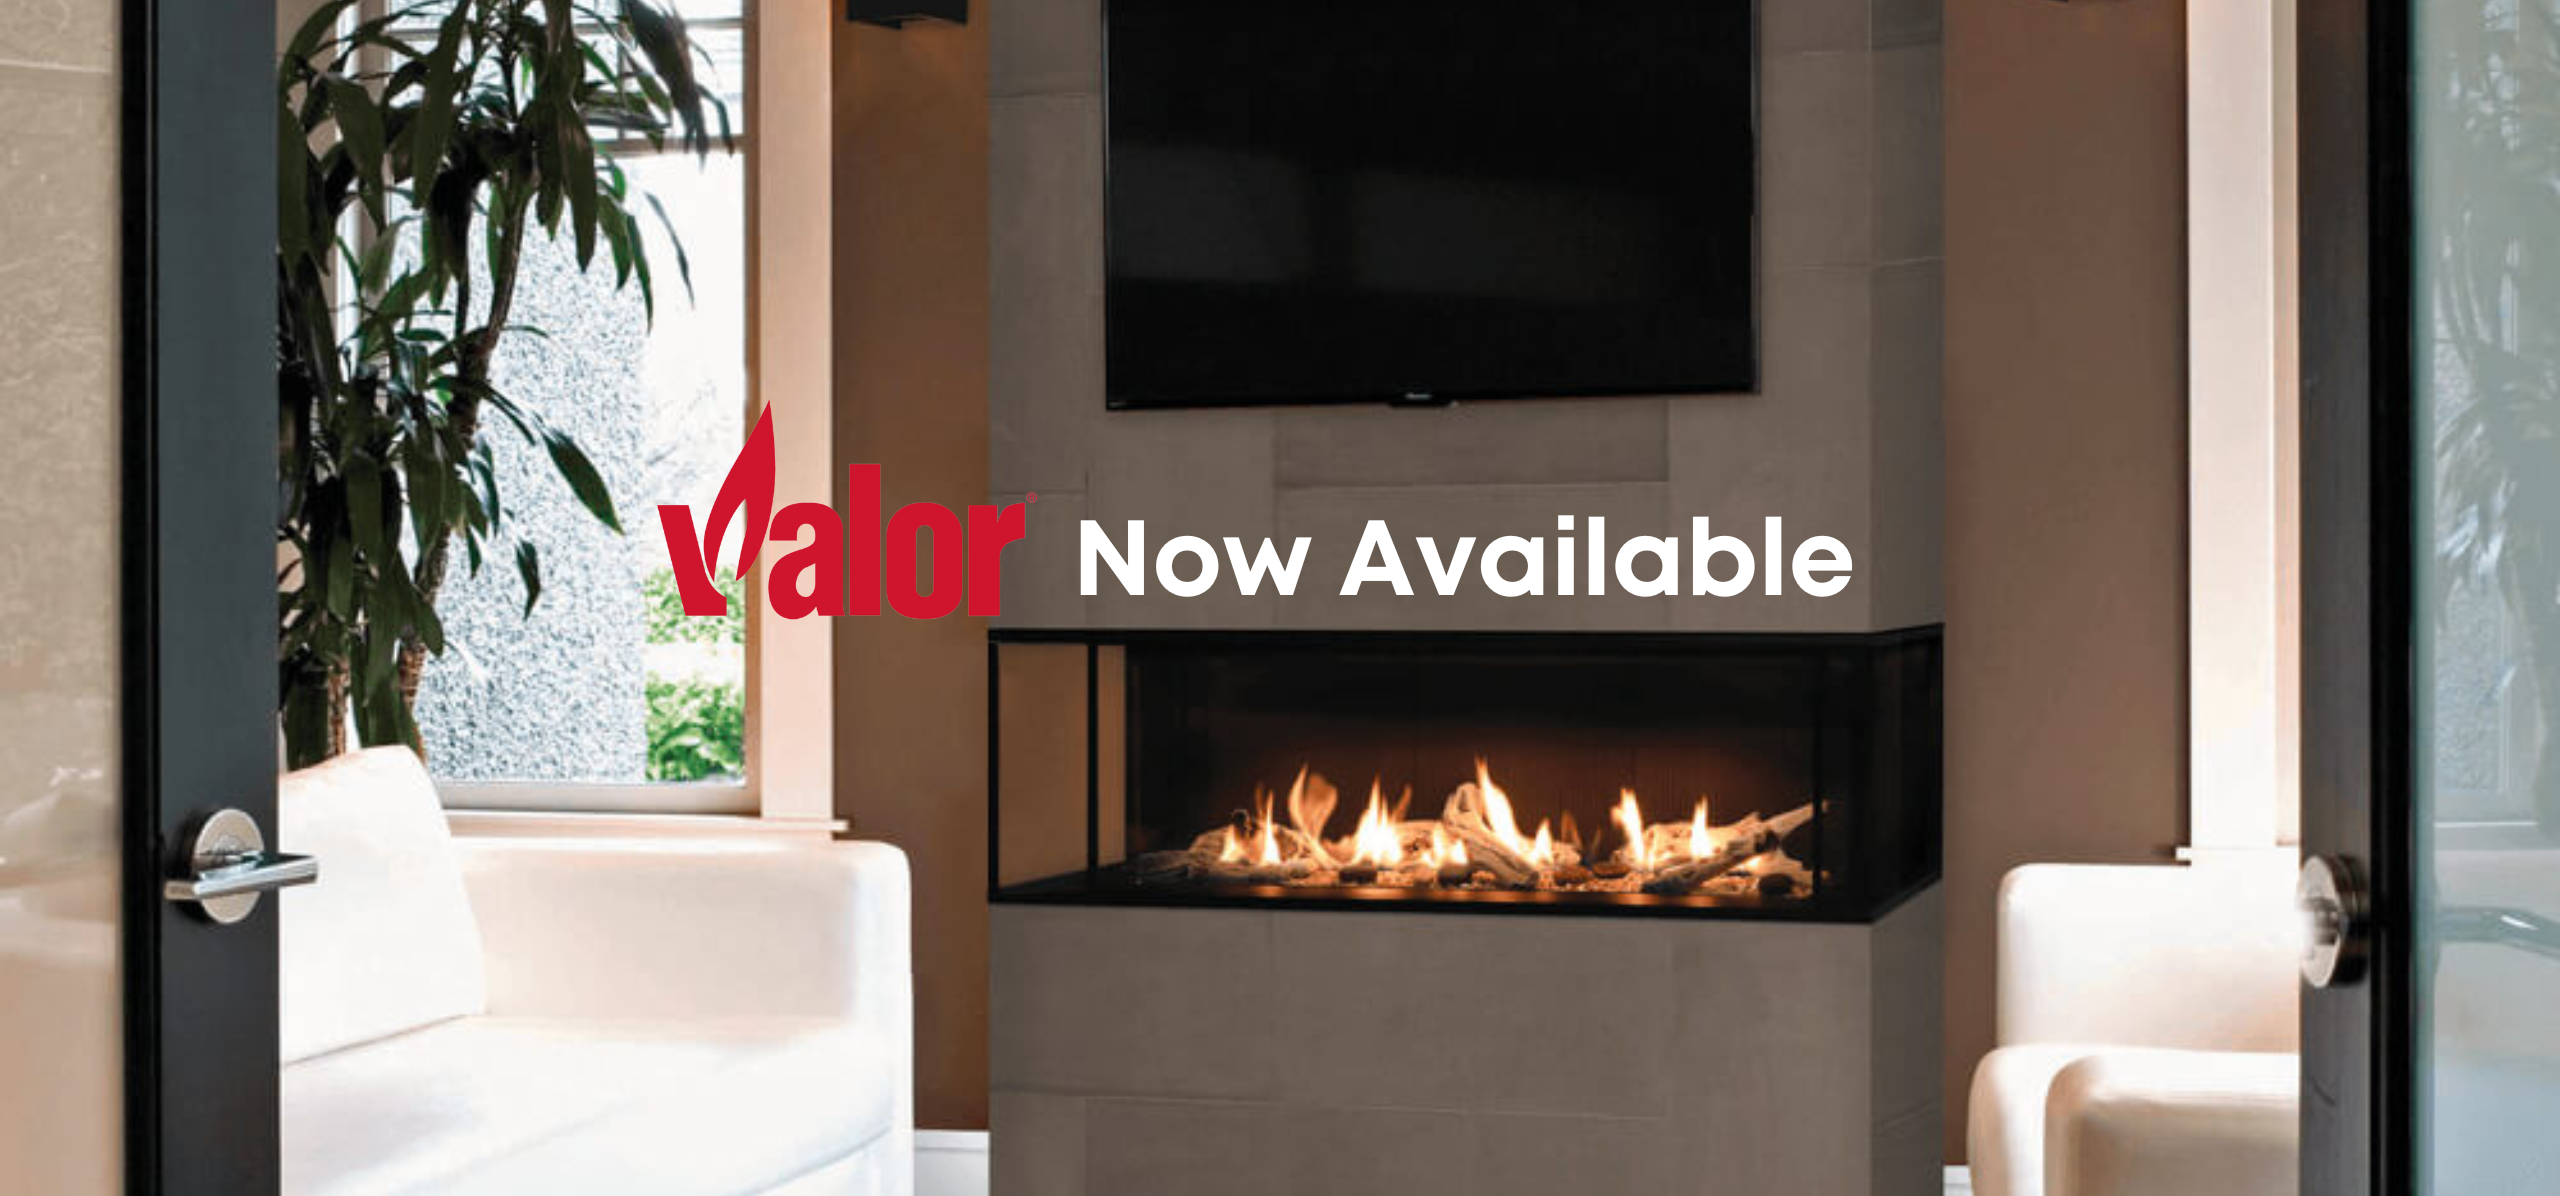 Valor Fireplaces now available at Vaglio